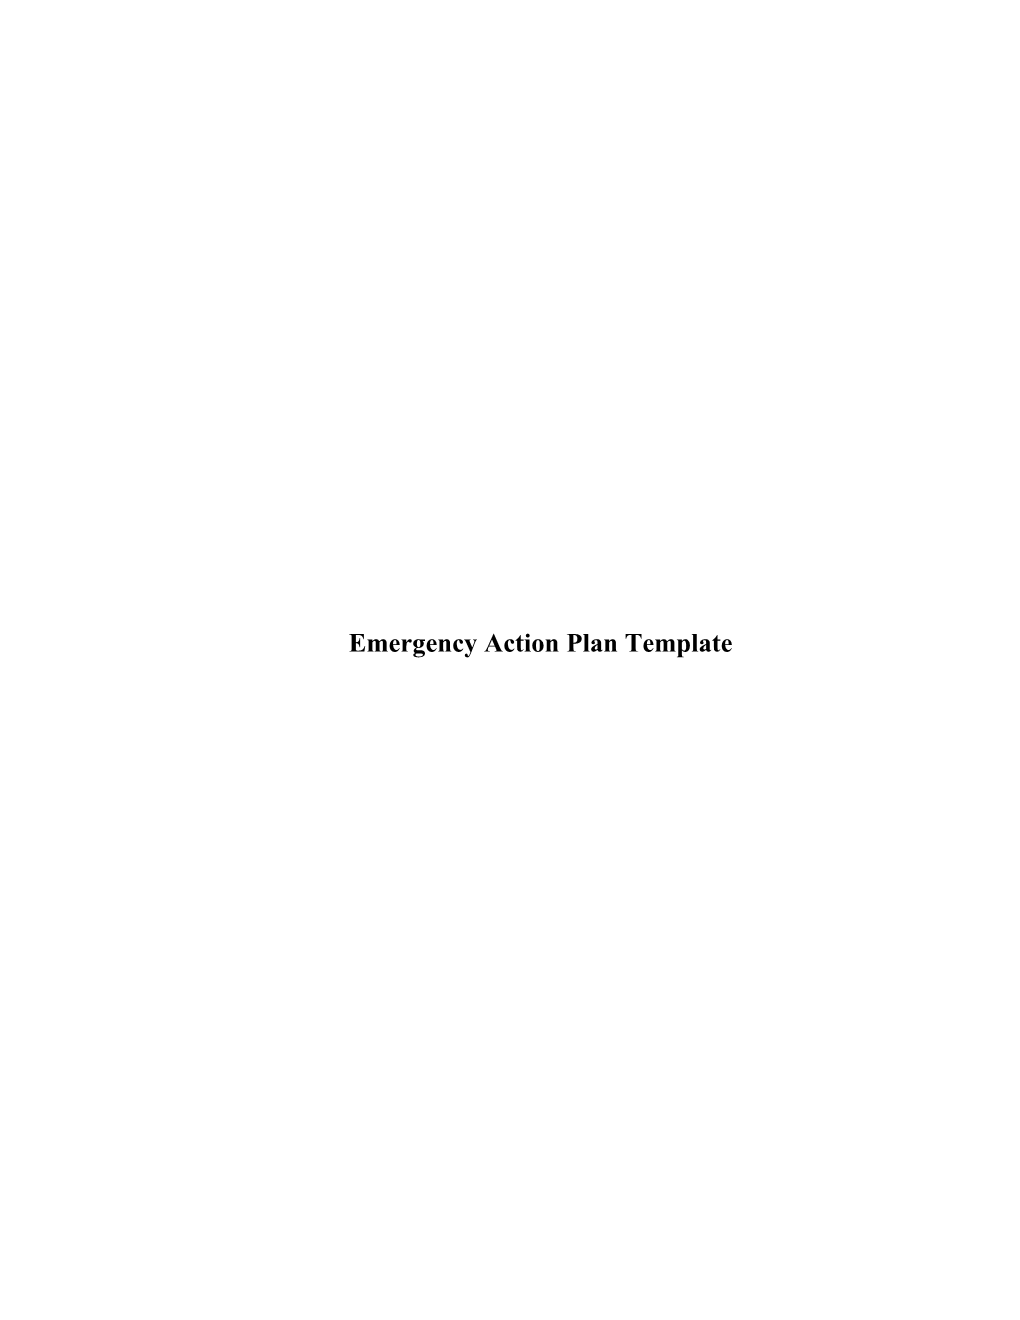 Emergency Action Plan Template s1